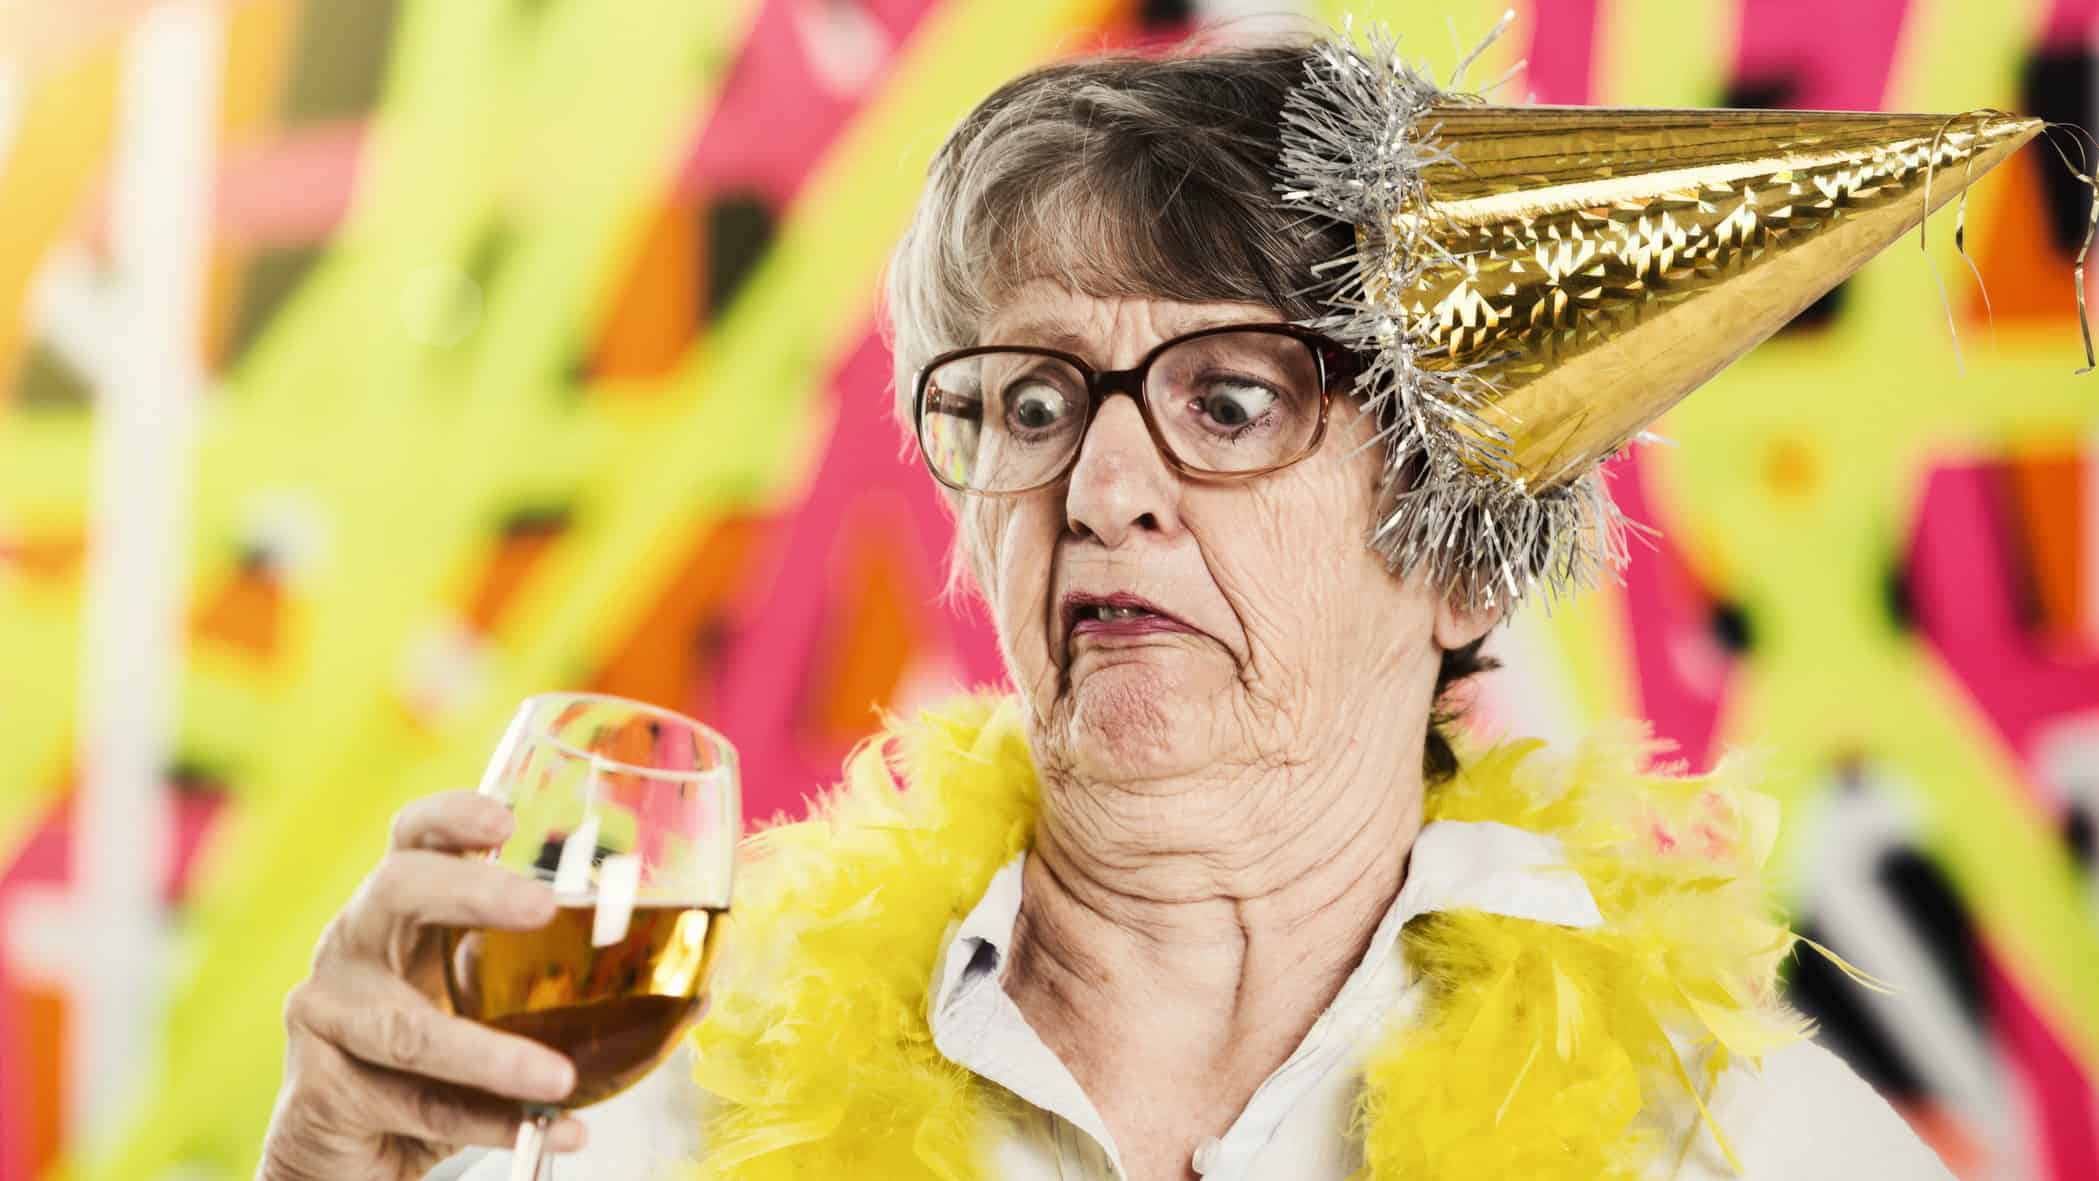 An older woman wearing a wonky party hat looks unpleasantly at a glass of wine in her hand.